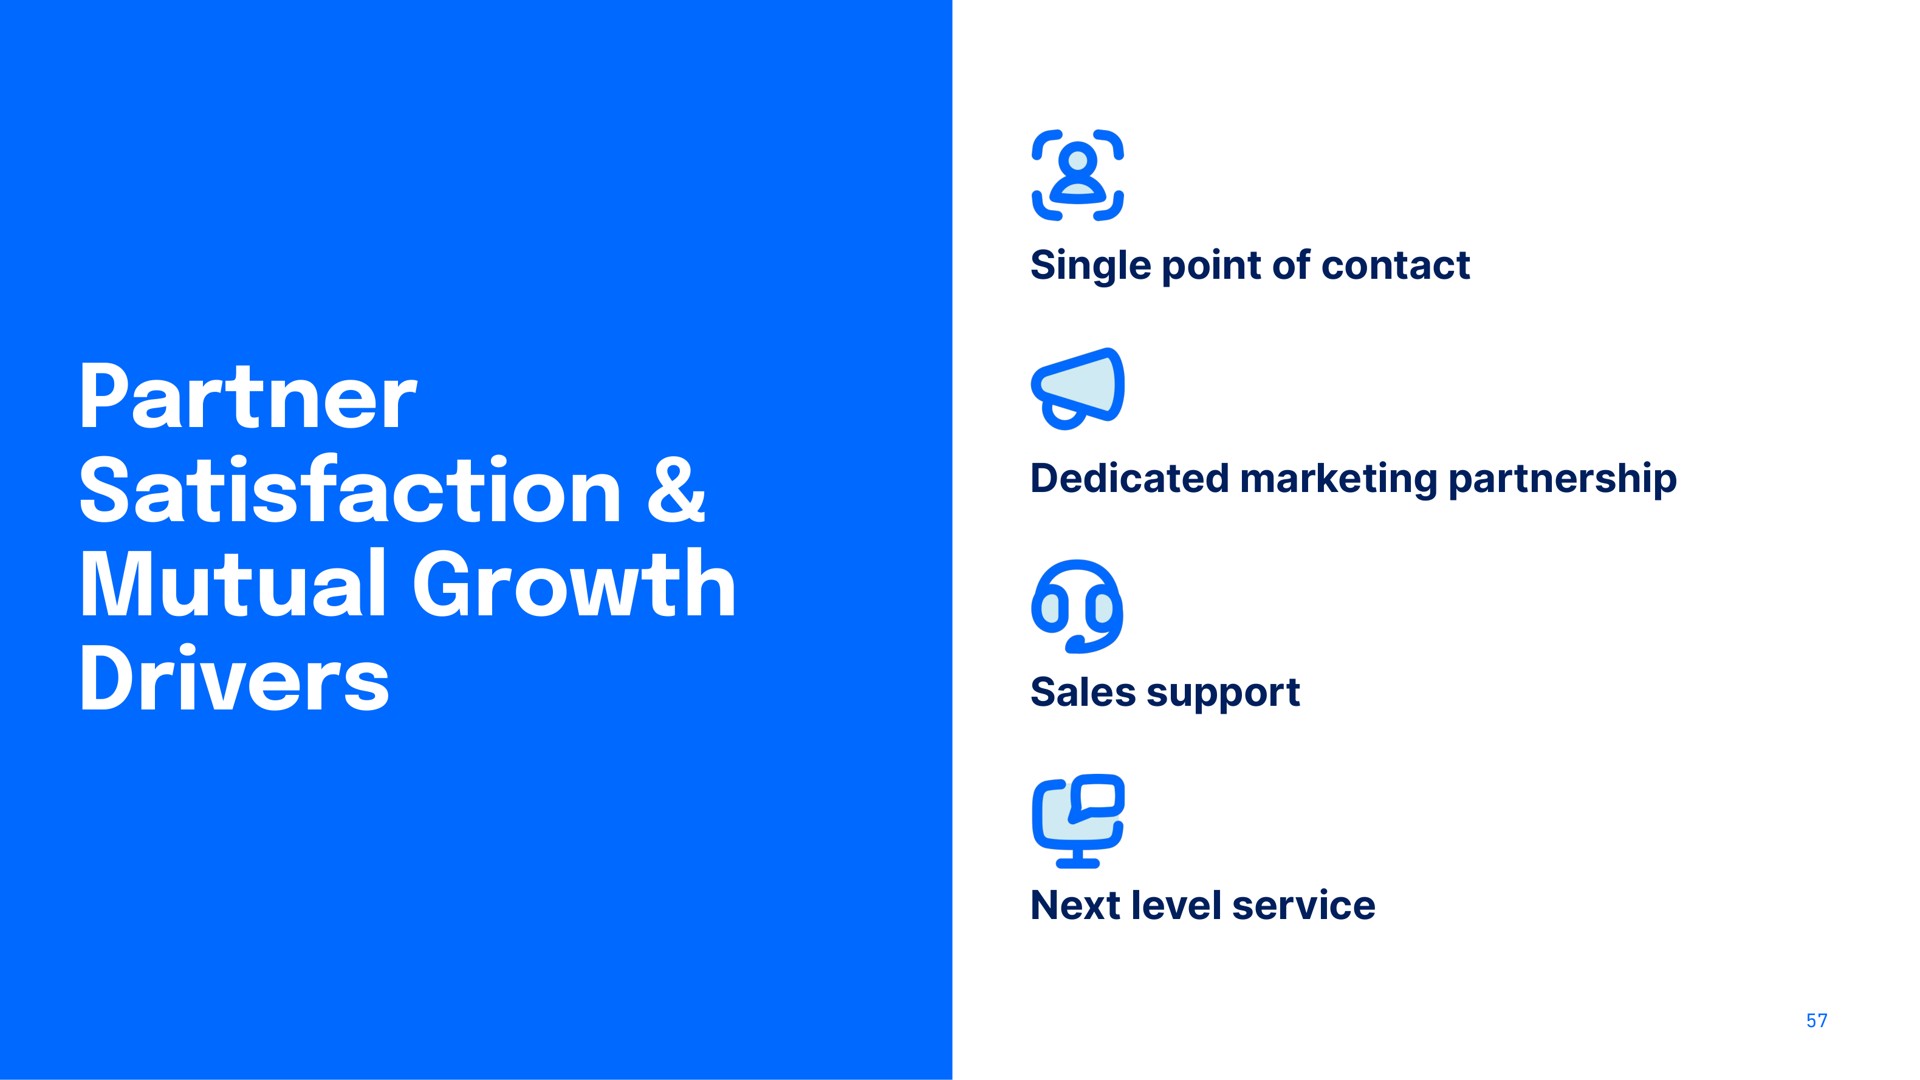 partner satisfaction mutual growth drivers single point of contact dedicated marketing partnership sales support next level service | DigitalOcean